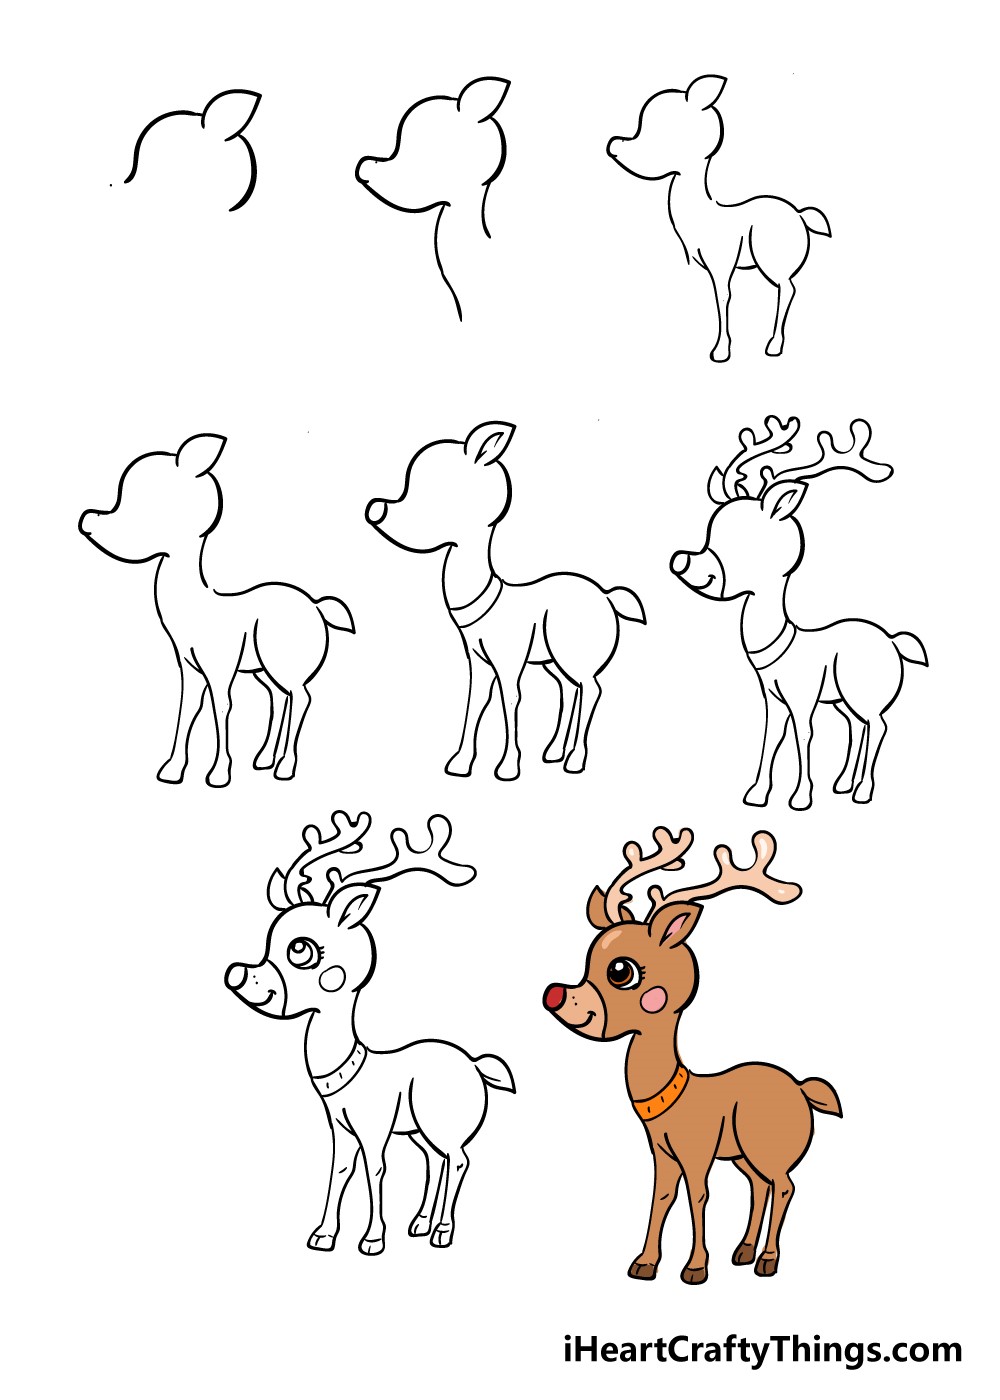 How to draw A cute Reindeer